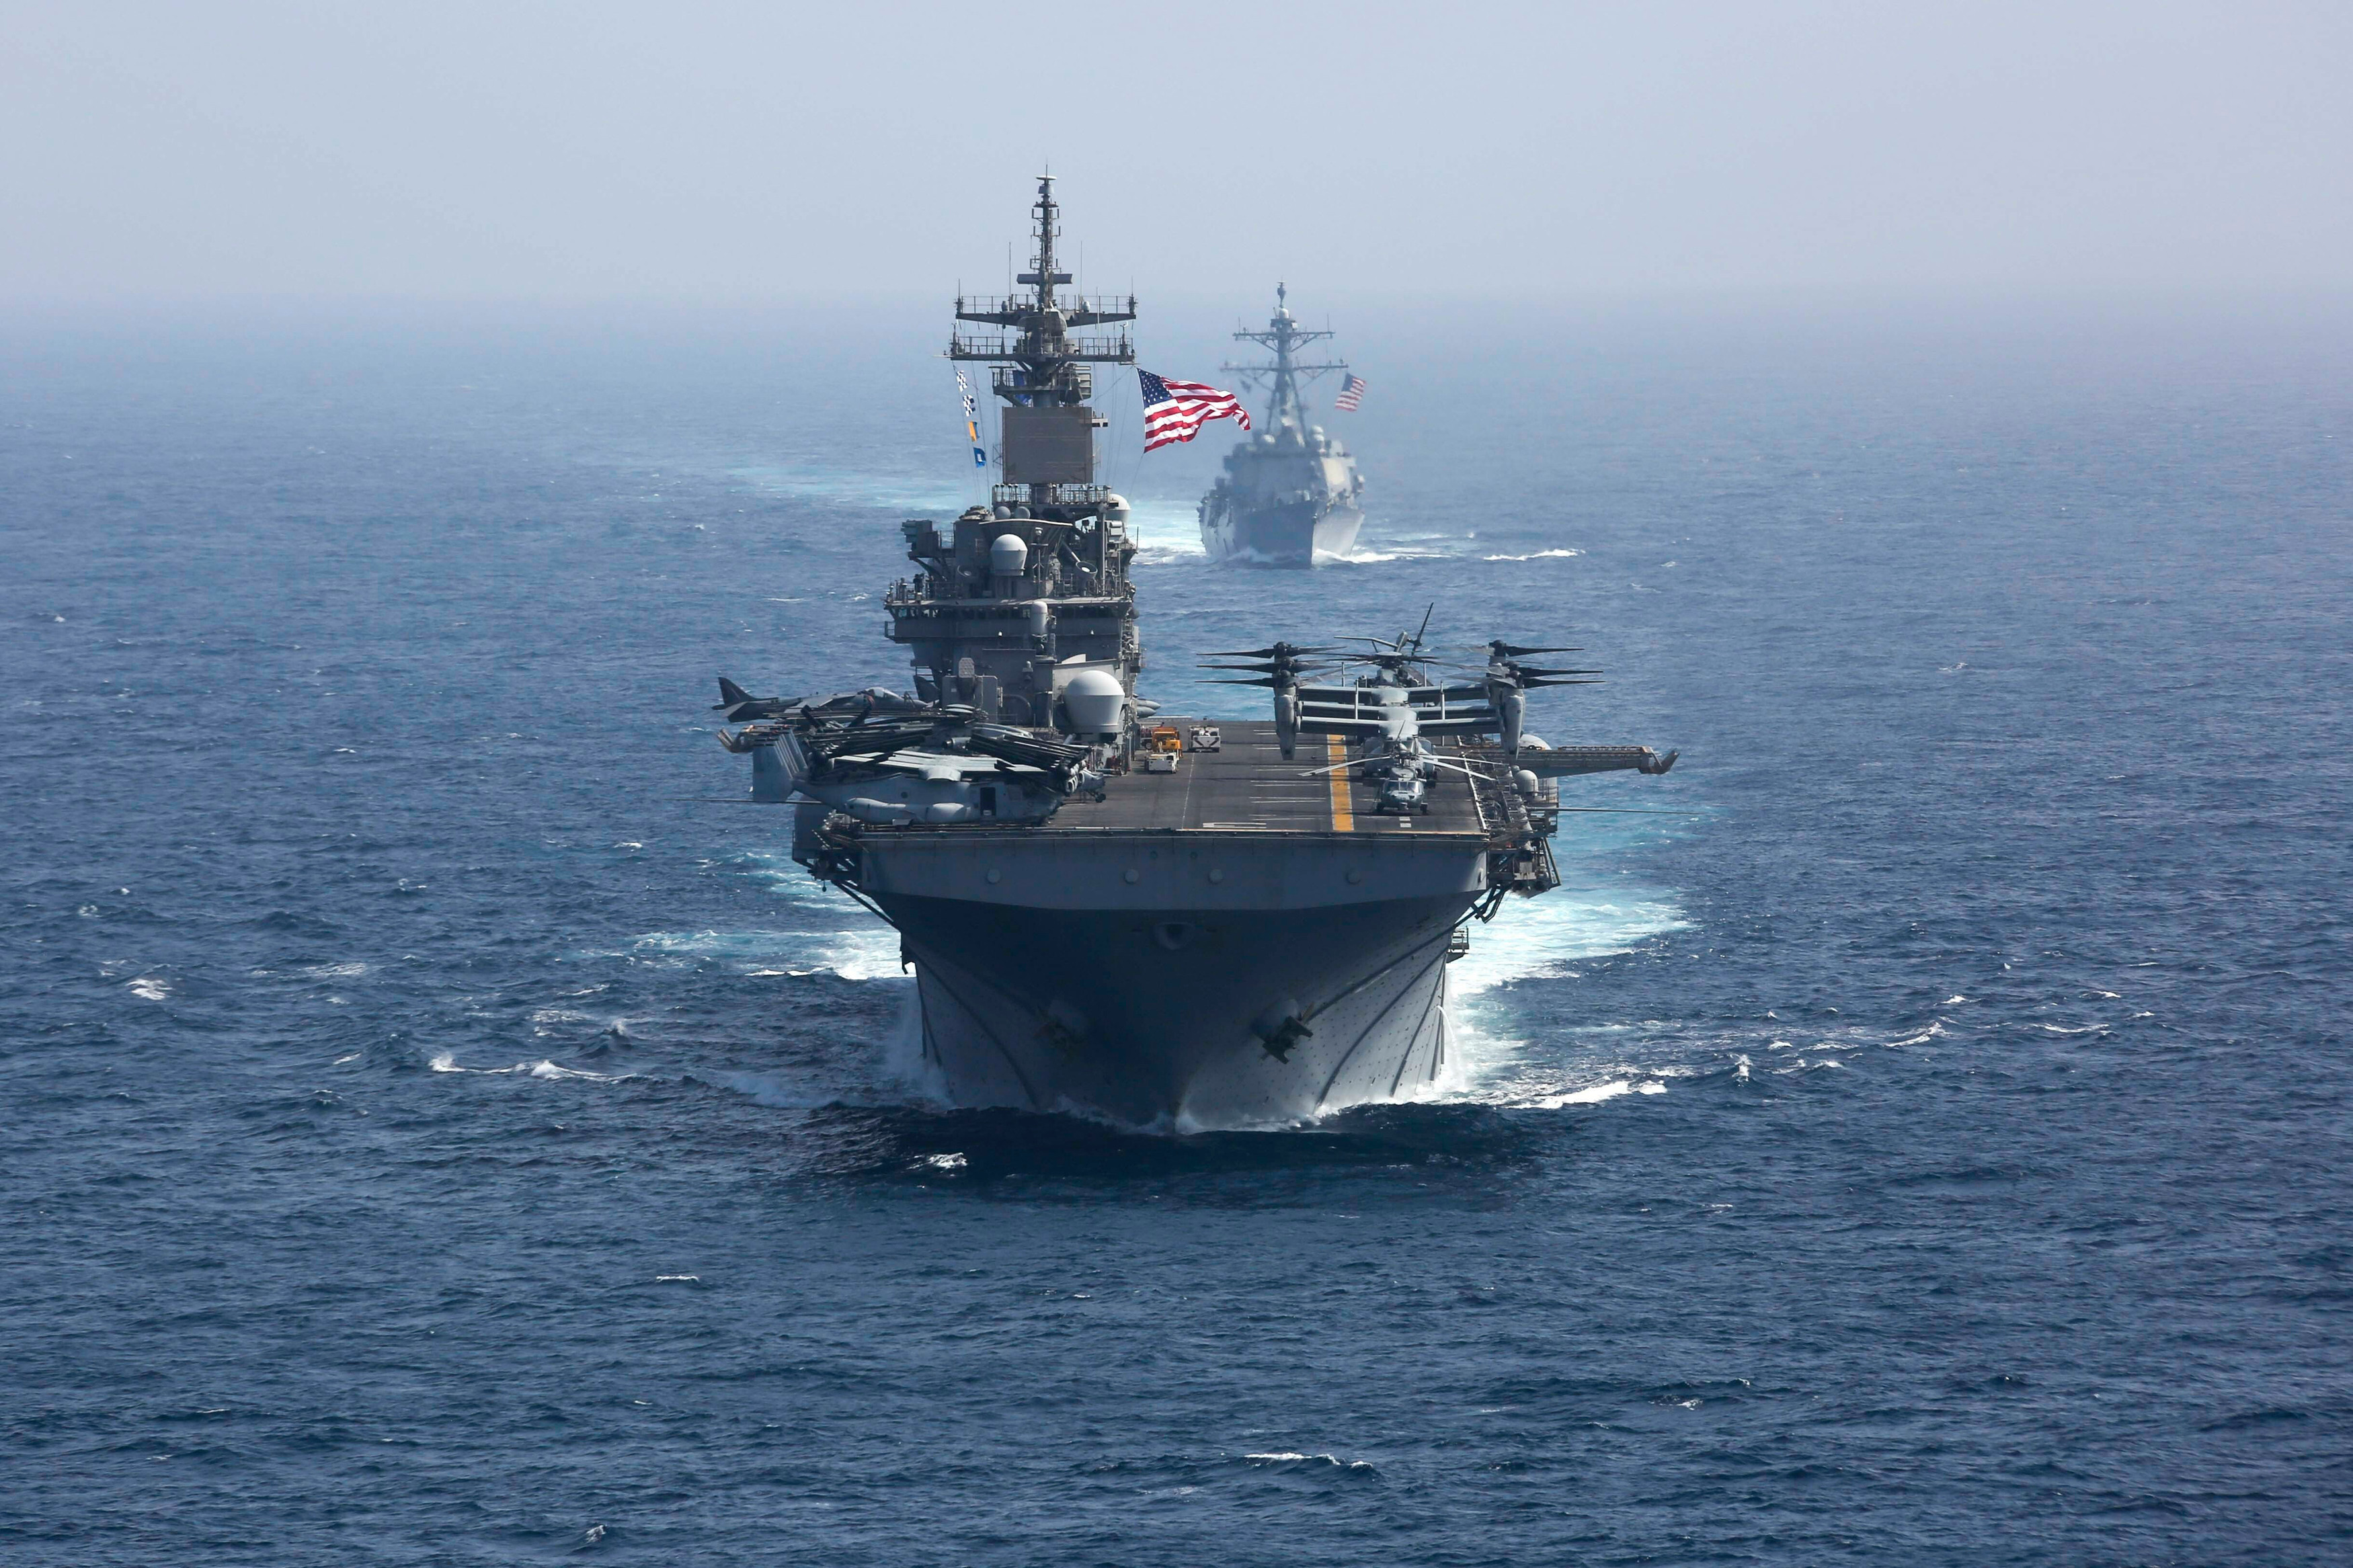  The amphibious assault ship USS Kearsarge (front) and the Arleigh Burke-class guided-missile destroyer USS Bainbridge